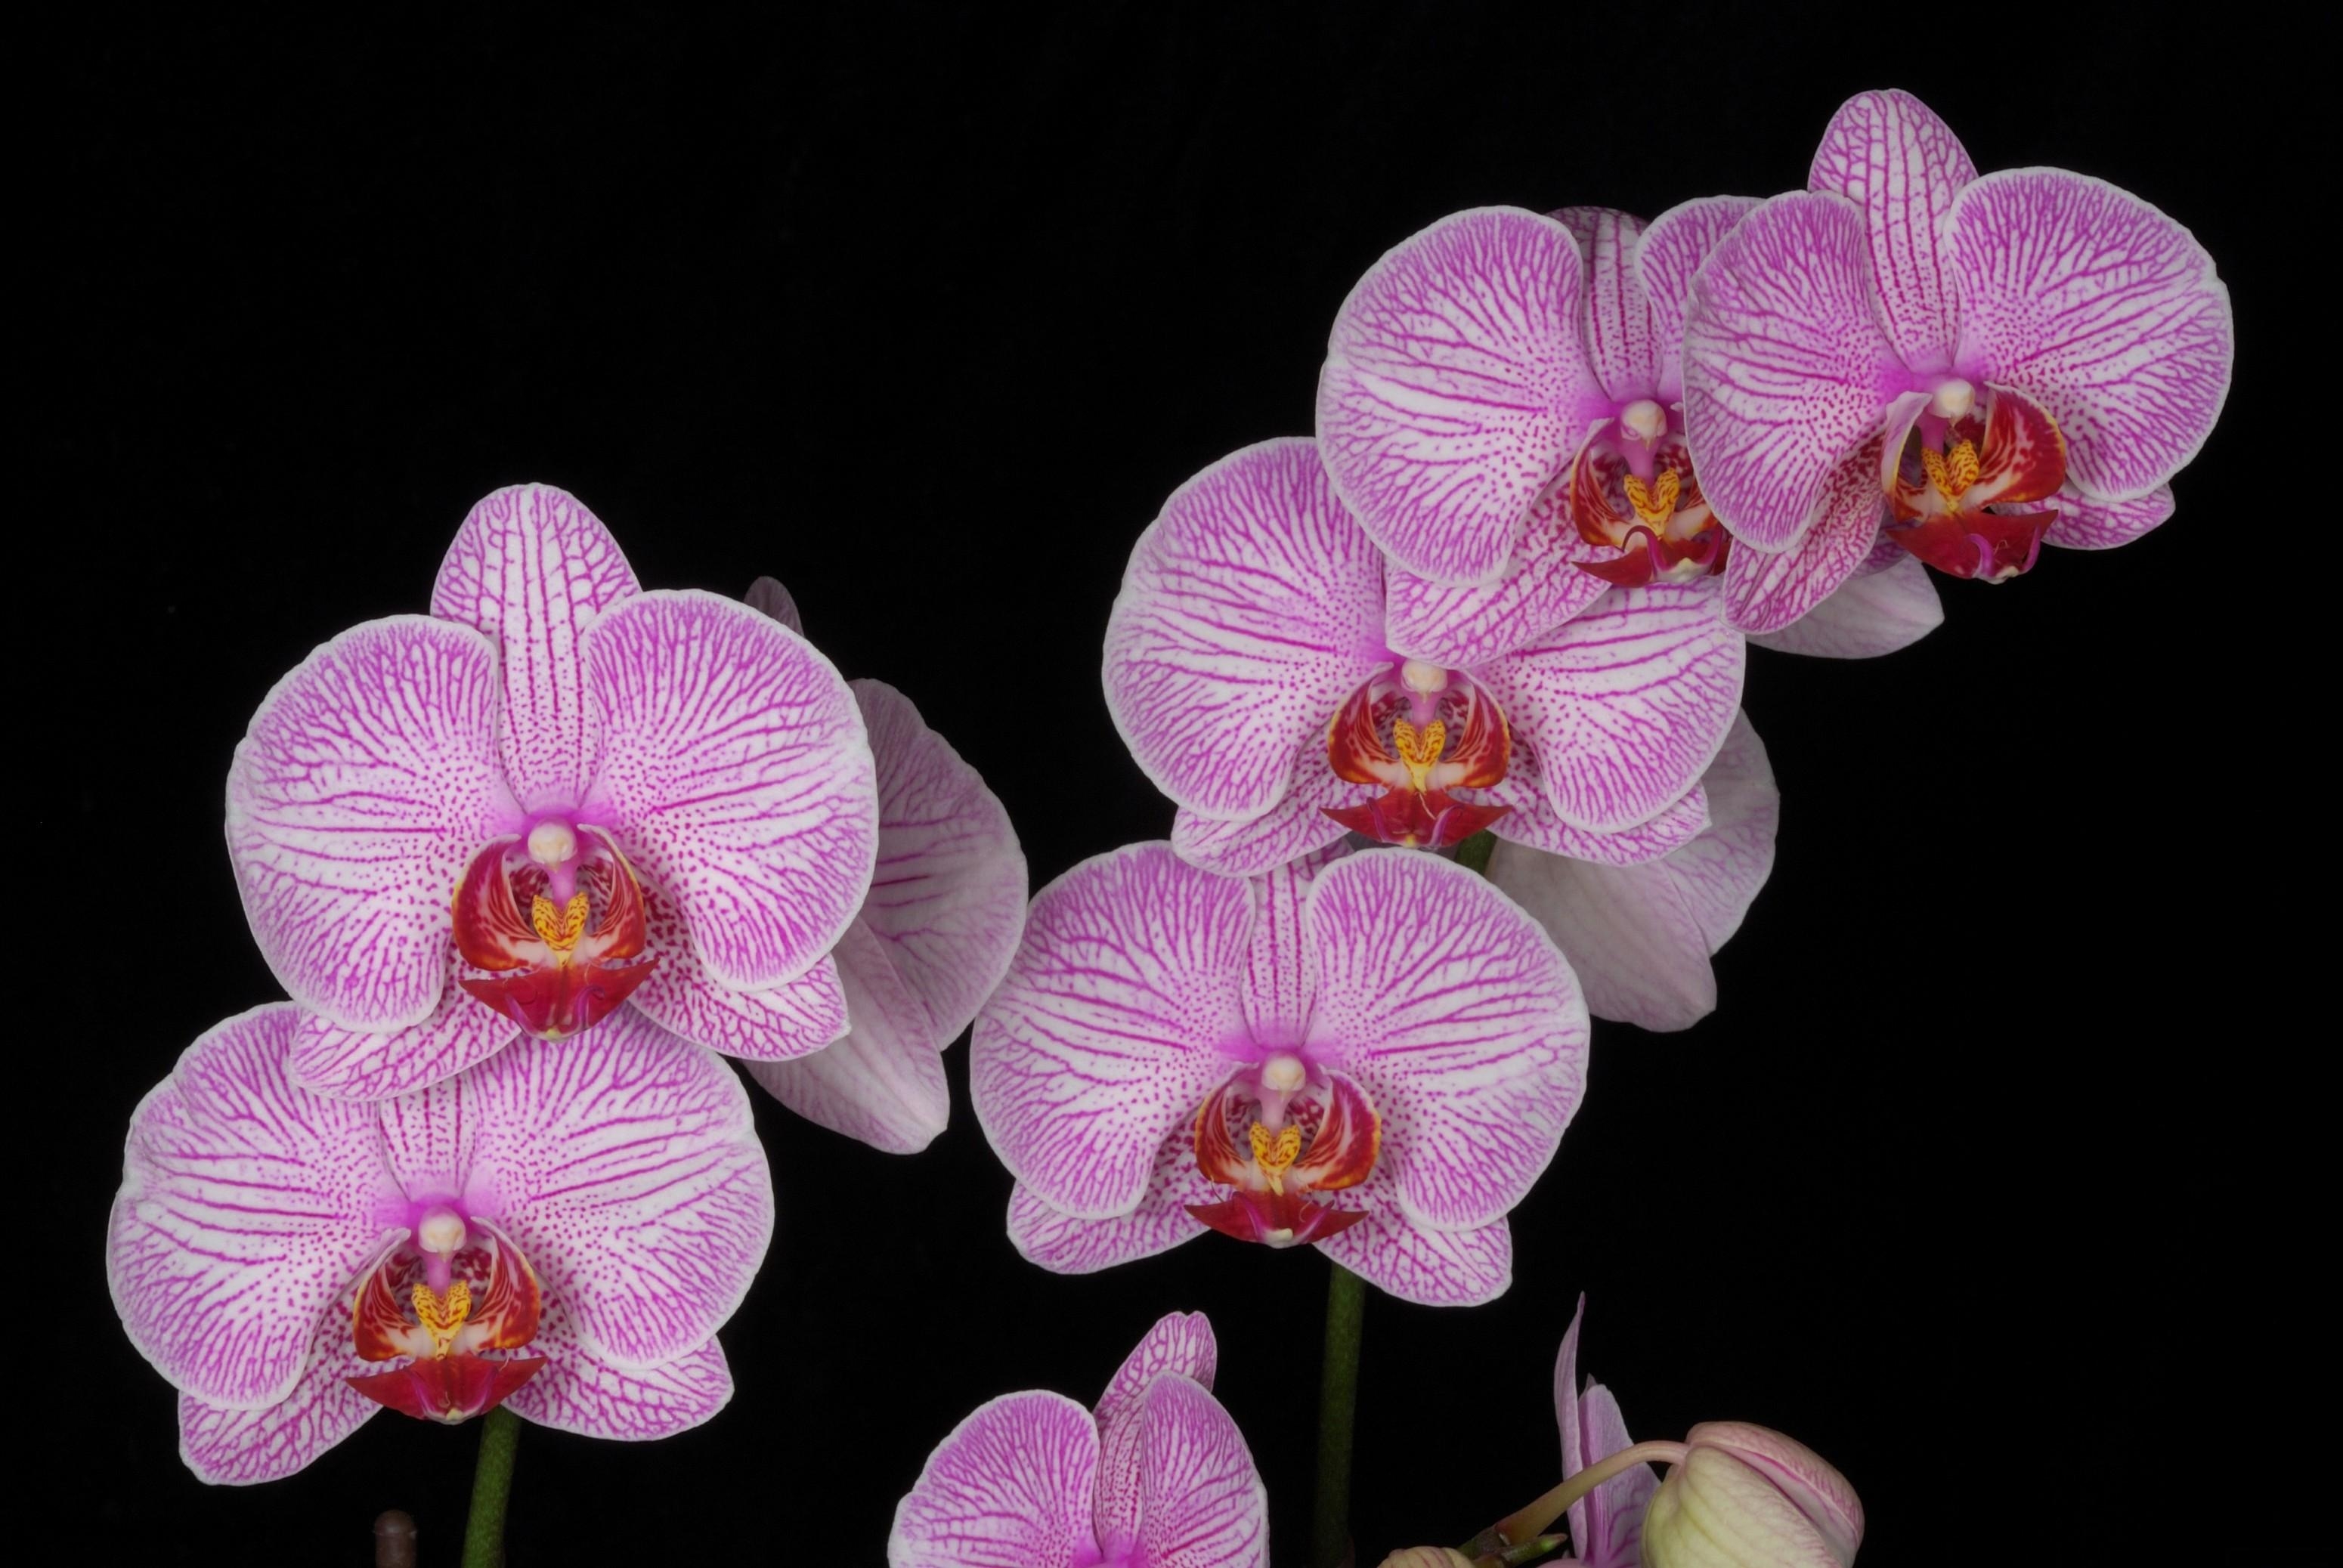 flowers, pink, branch, black background, orchid, exotic, exotics